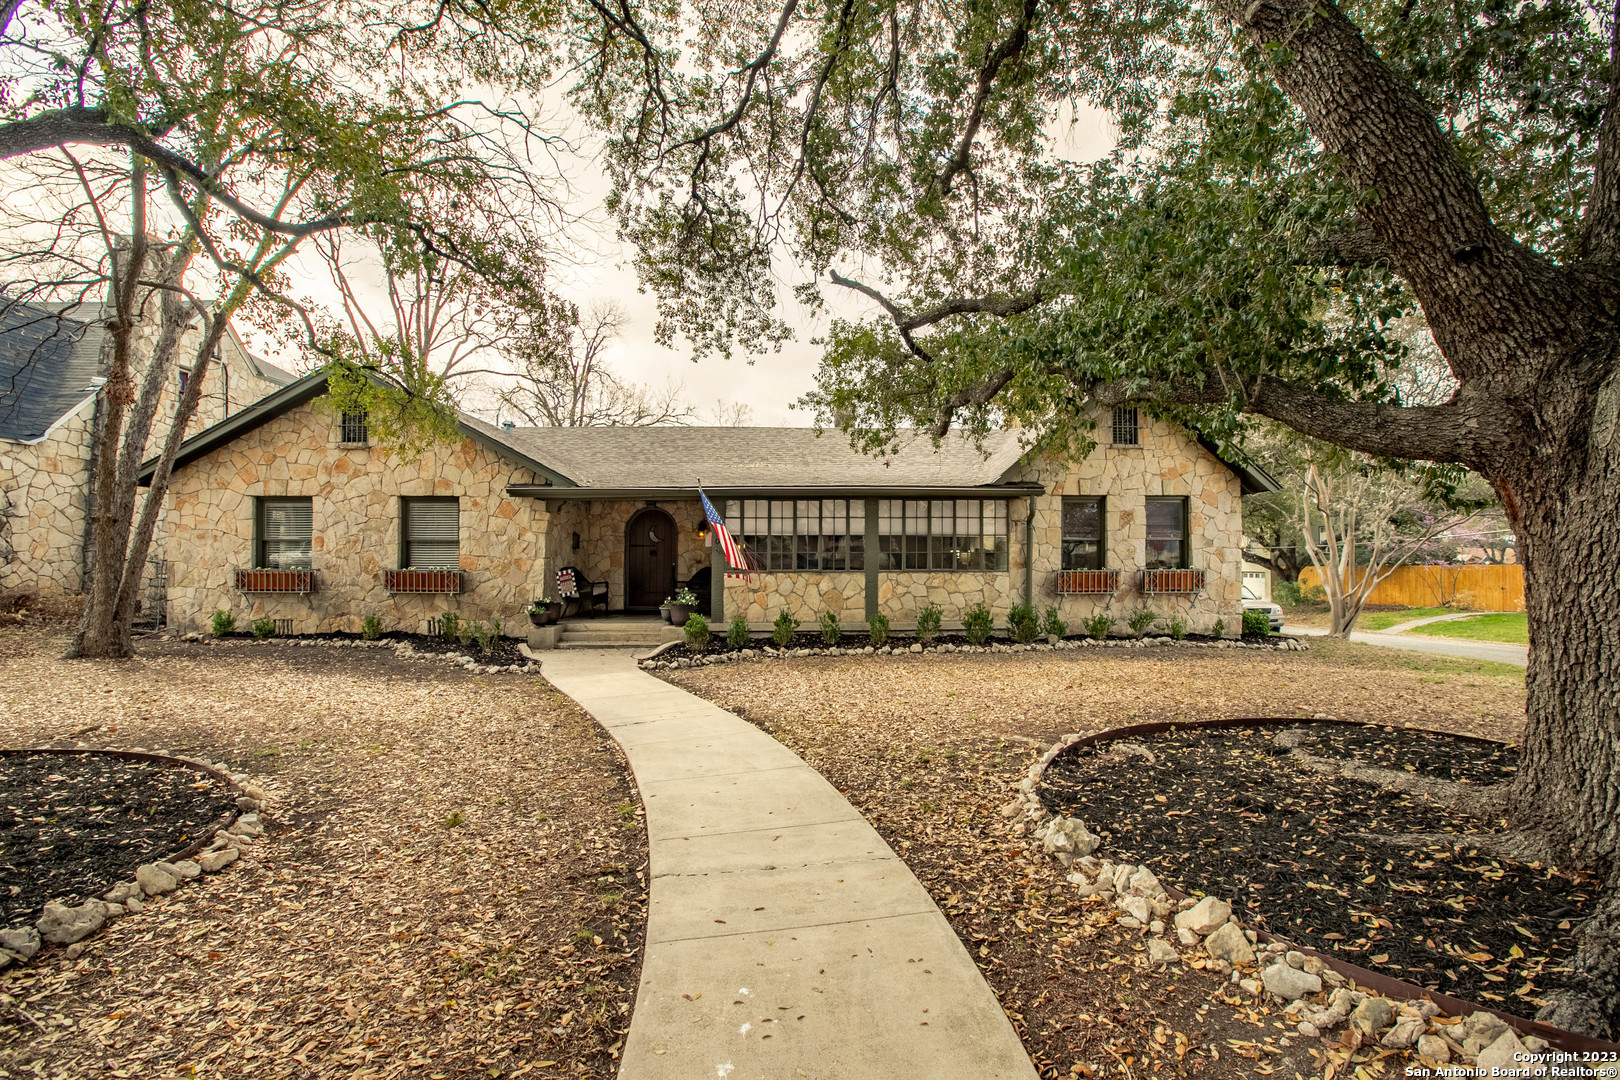 Charming stone home with oversized 1 bedroom casita in historic Monticello Park. This 1940's home has been meticulously restored while maintaining the historic charm like pastel/violet bathroom tile, built-ins, plaster walls, arched doorways, and exposed beams! From original windows, glass knobs, refinished hardwood floors, to the updated kitchen with butler's panty, this home has all the perks of modern upgrades while maintaining its historic charm. Enjoy a spacious, light filled living room with cozy fireplace, centrally located dining area, high ceilings throughout, and a generous secondary bedroom/study. Walk to Woodlawn Lake and enjoy fireworks from your large airy front porch, or your spacious, private backyard with large 2 car garage, and 420 sq ft casita.